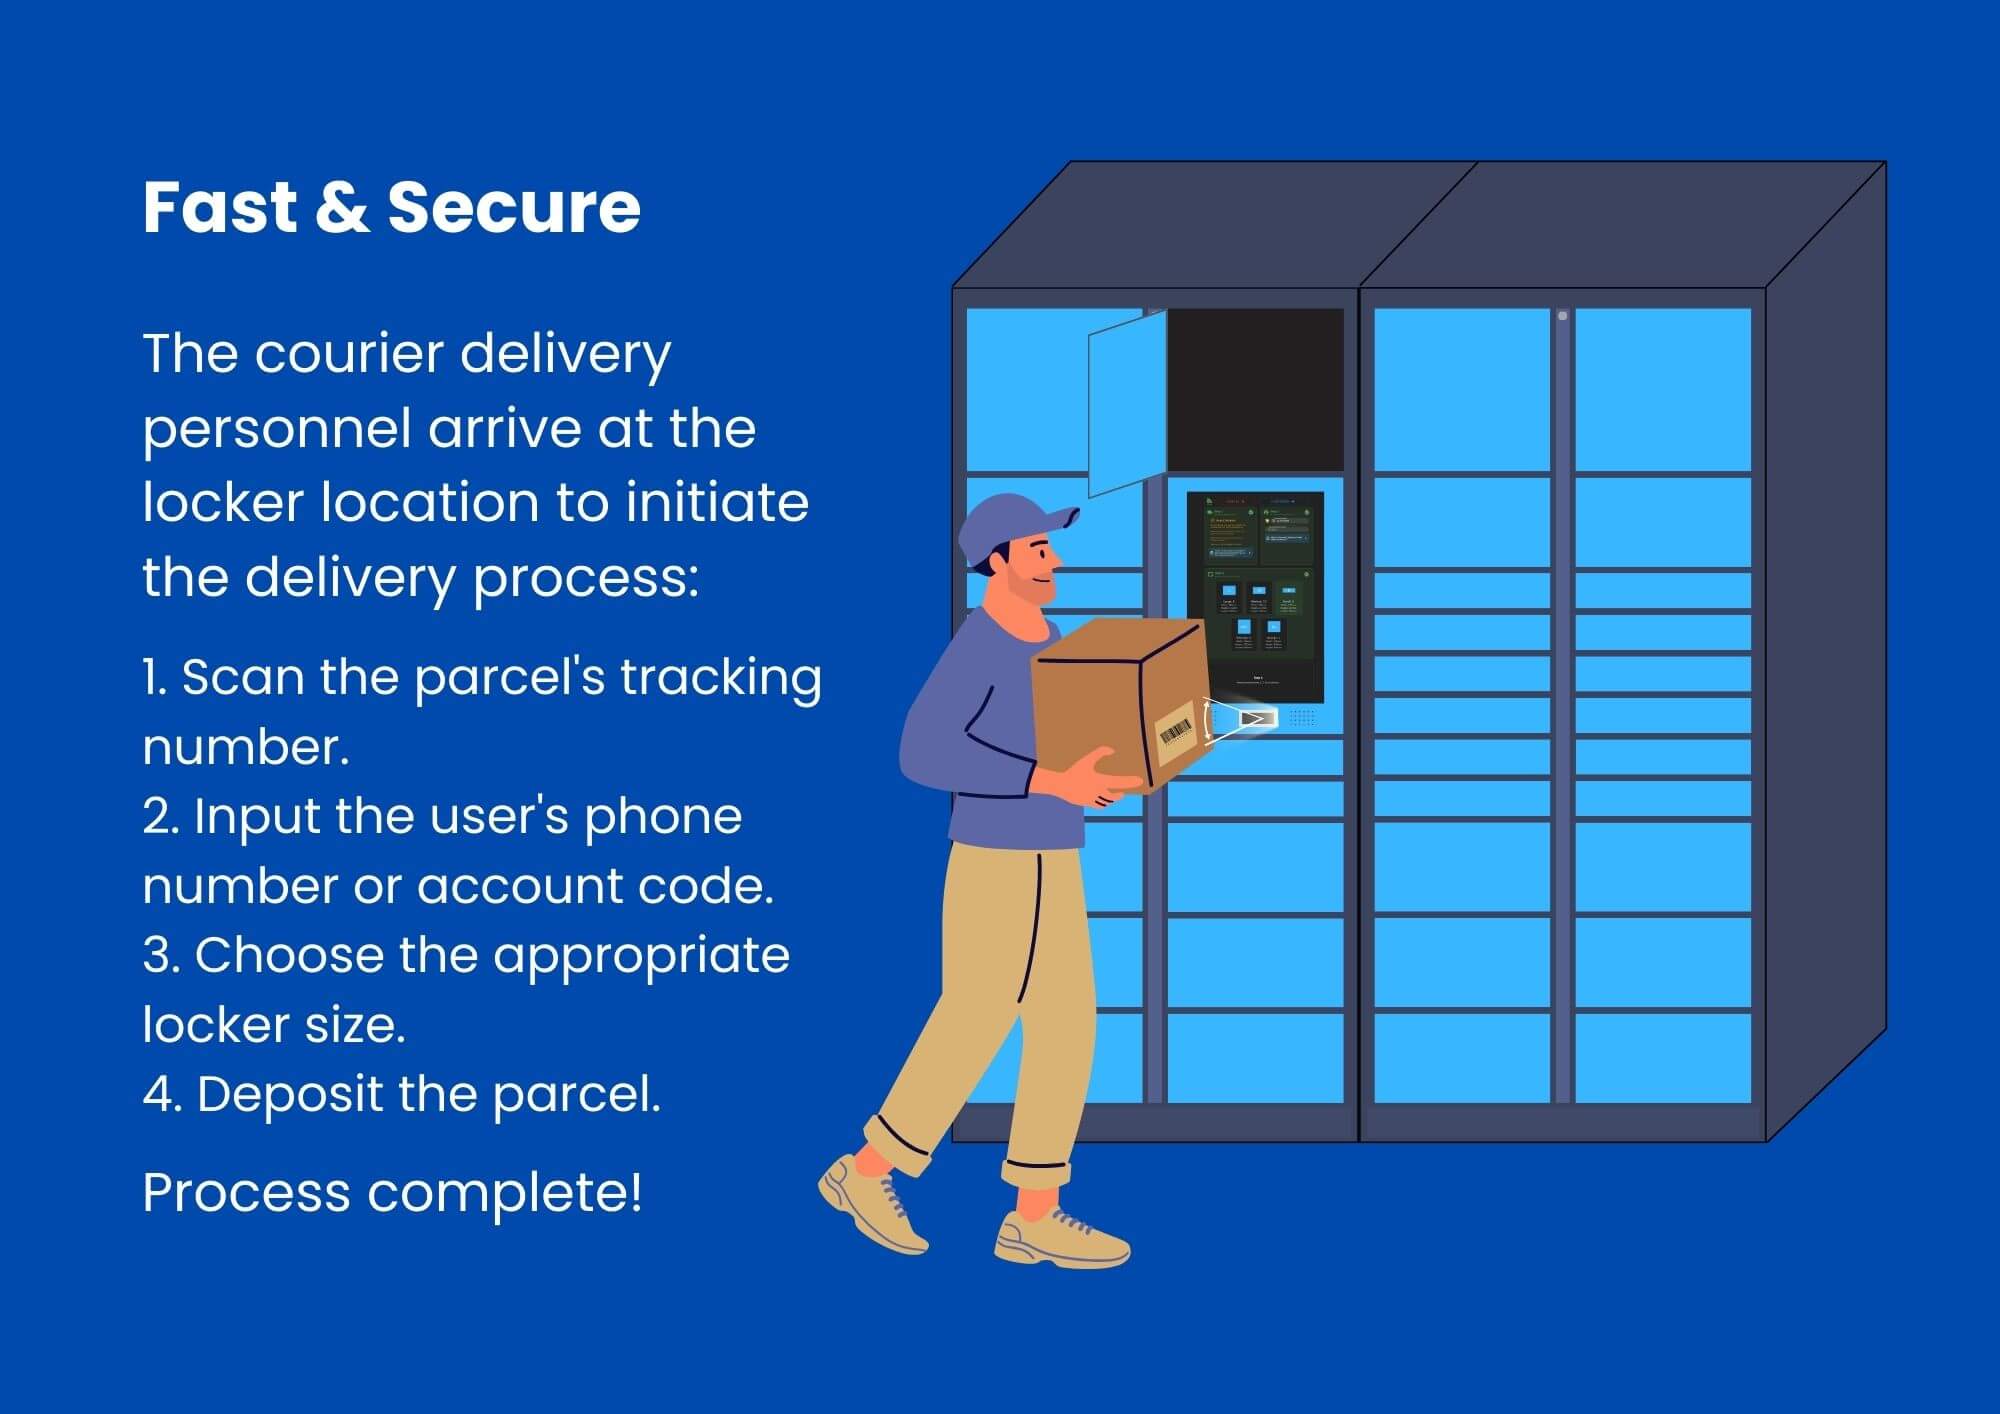 ezlock fast and secure way to delivery parcel